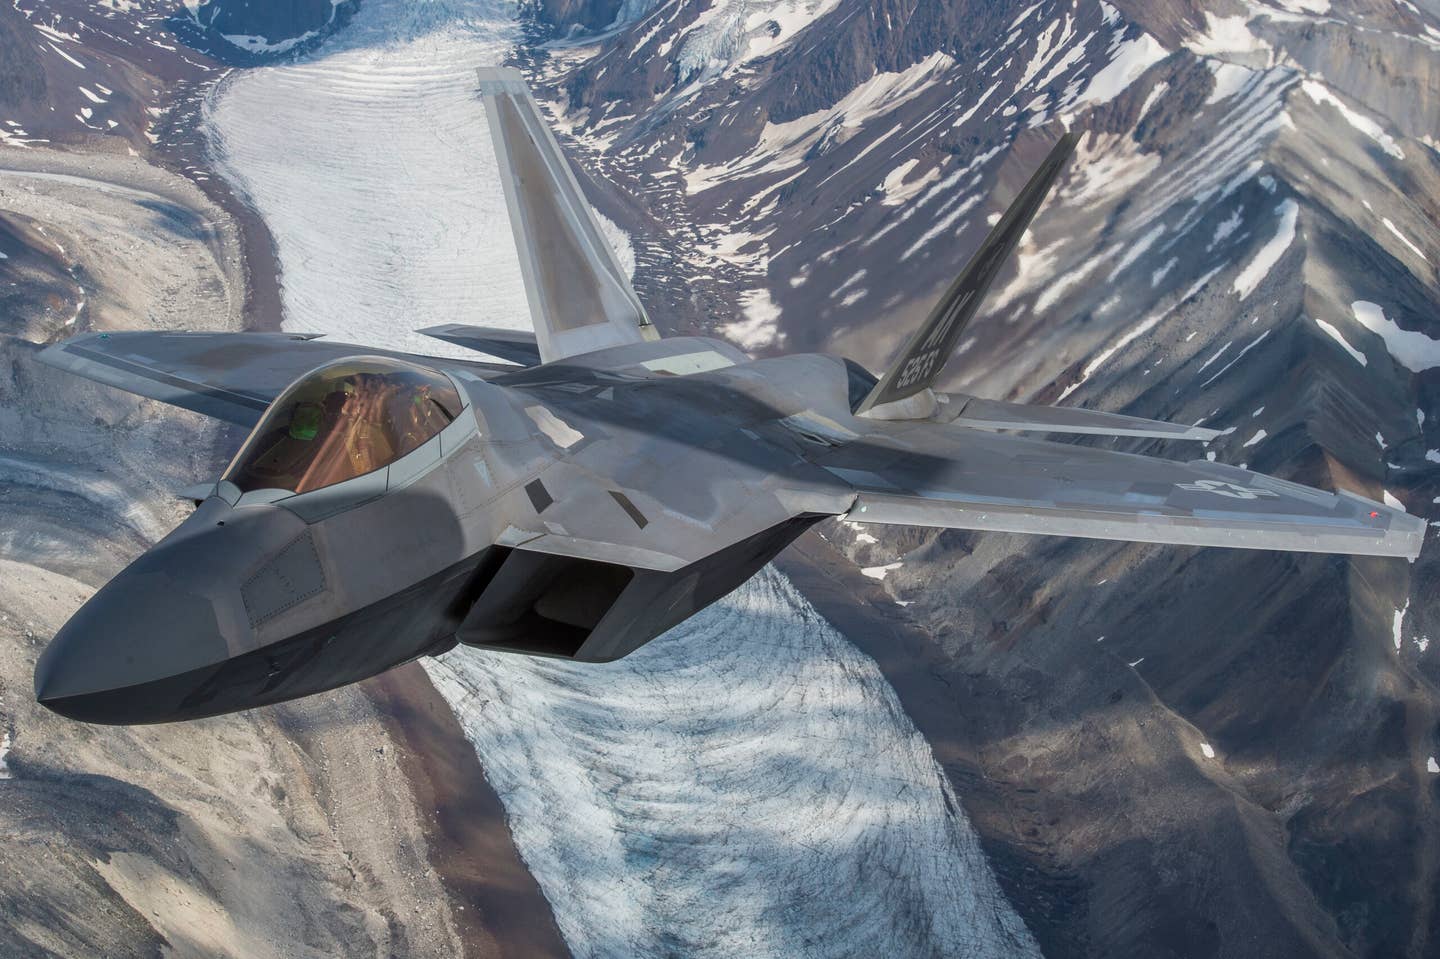 A U.S. Air Force F-22 Raptor from Joint Base Elmendorf-Richardson, flies in formation over the Joint Pacific Alaska Range Complex, July 18, 2019. The JPARC is a 67,000 plus square mile area, providing a realistic training environment commanders leverage for full spectrum engagements, ranging from individual skills to complex, large-scale joint engagements.  (U.S. Air Force photo by Staff Sgt. James Richardson)